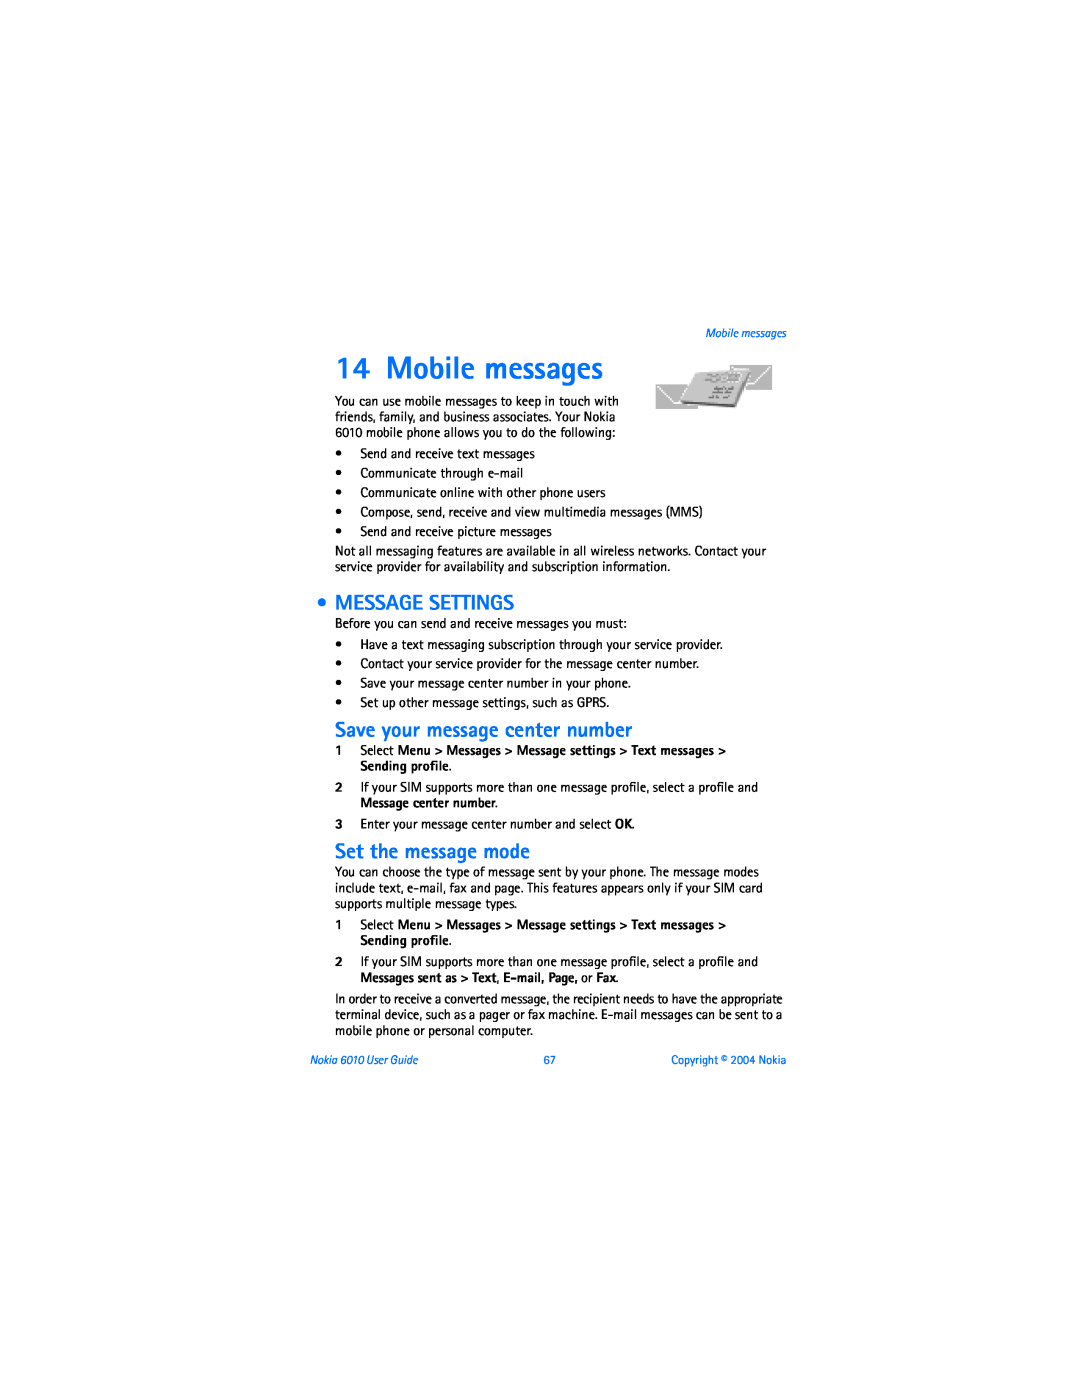 Nokia 6010 warranty Mobile messages, Message Settings, Save your message center number, Set the message mode 